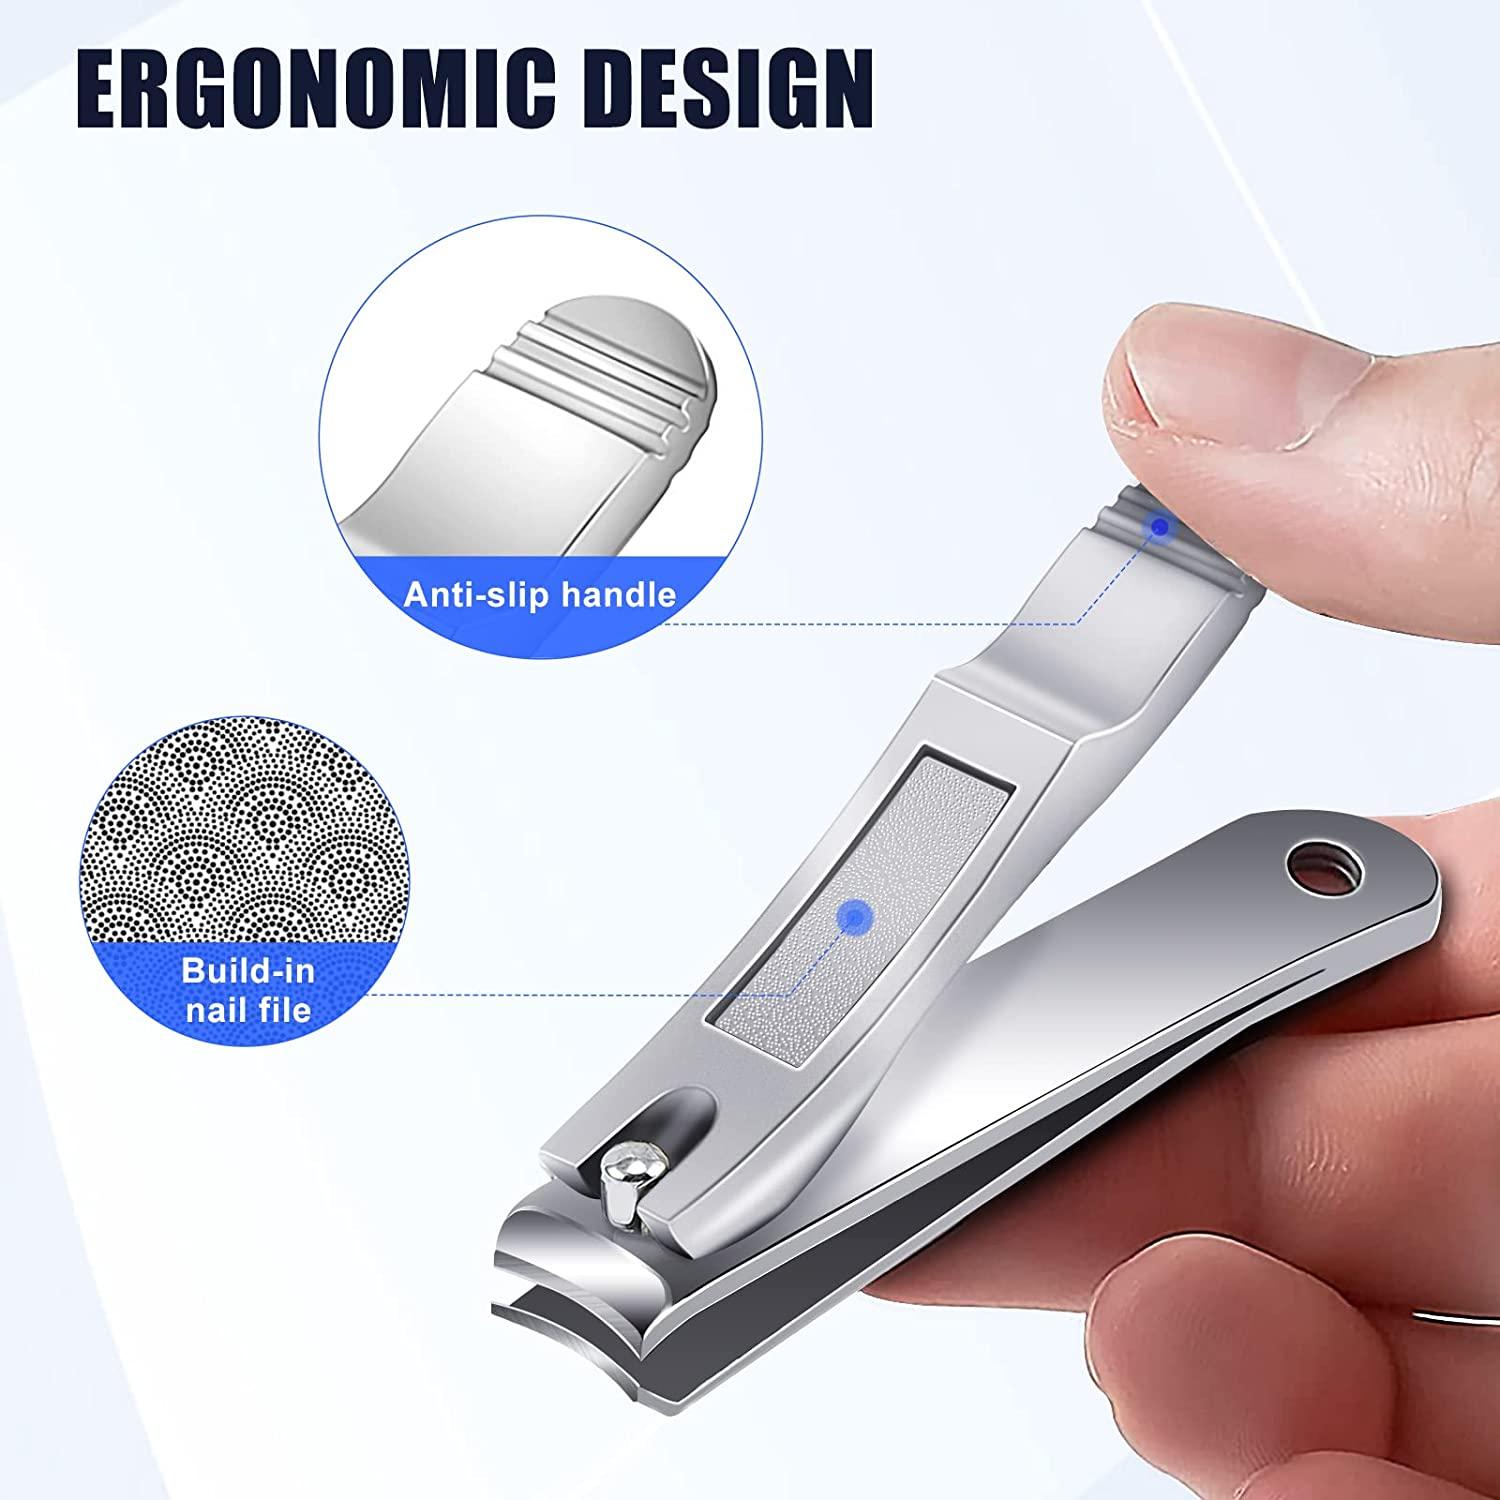 Nail Clippers Set for Fingernail Toenail - DRMODE Large & Small 2 Pack  Professional Stainless Steel Toe Nail Clippers Nail Cutter, Sharp Travel  Finger